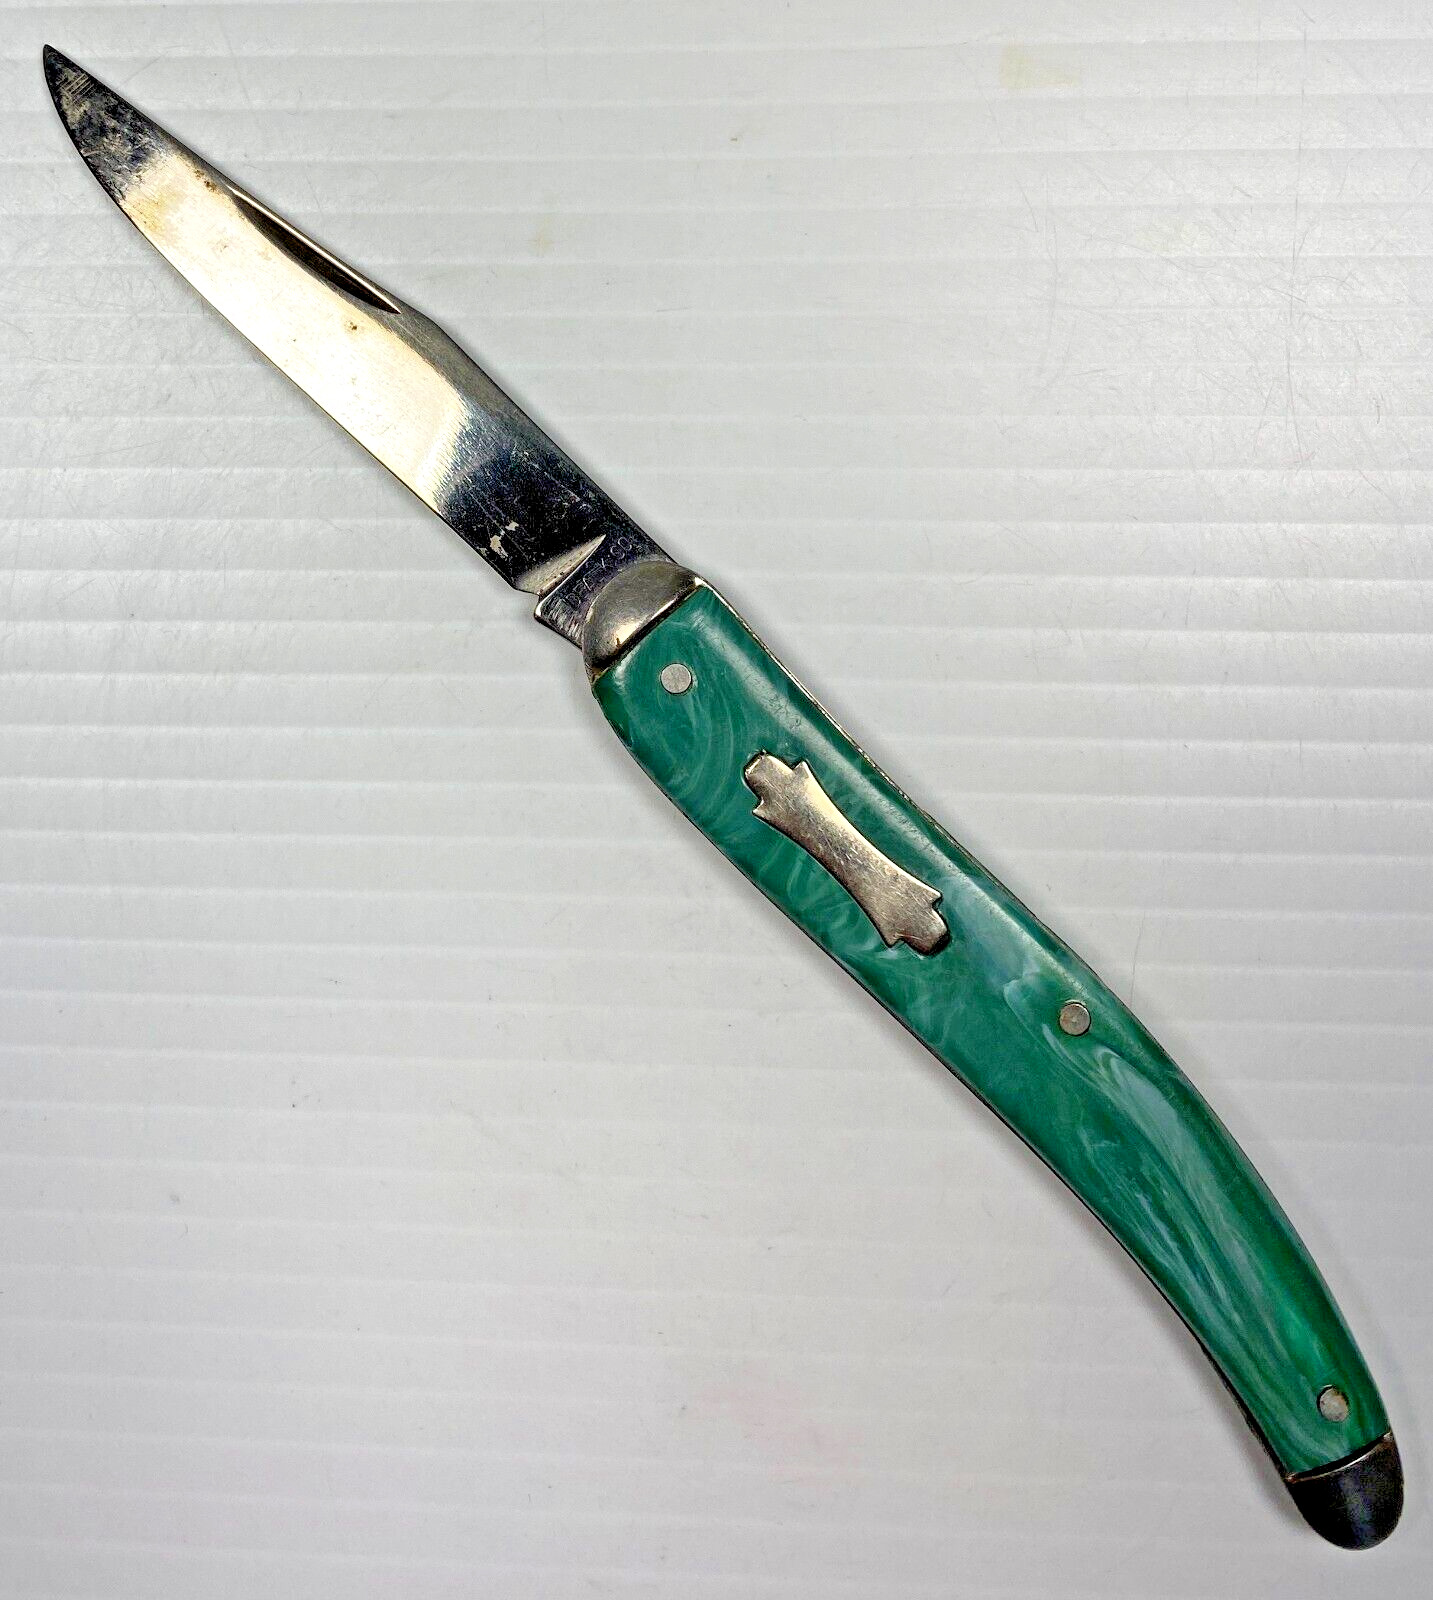 VINTAGE IDEAL K CO. GREEN SLIP JOINT POCKET KNIFE MADE IN THE USA NICE TOOL